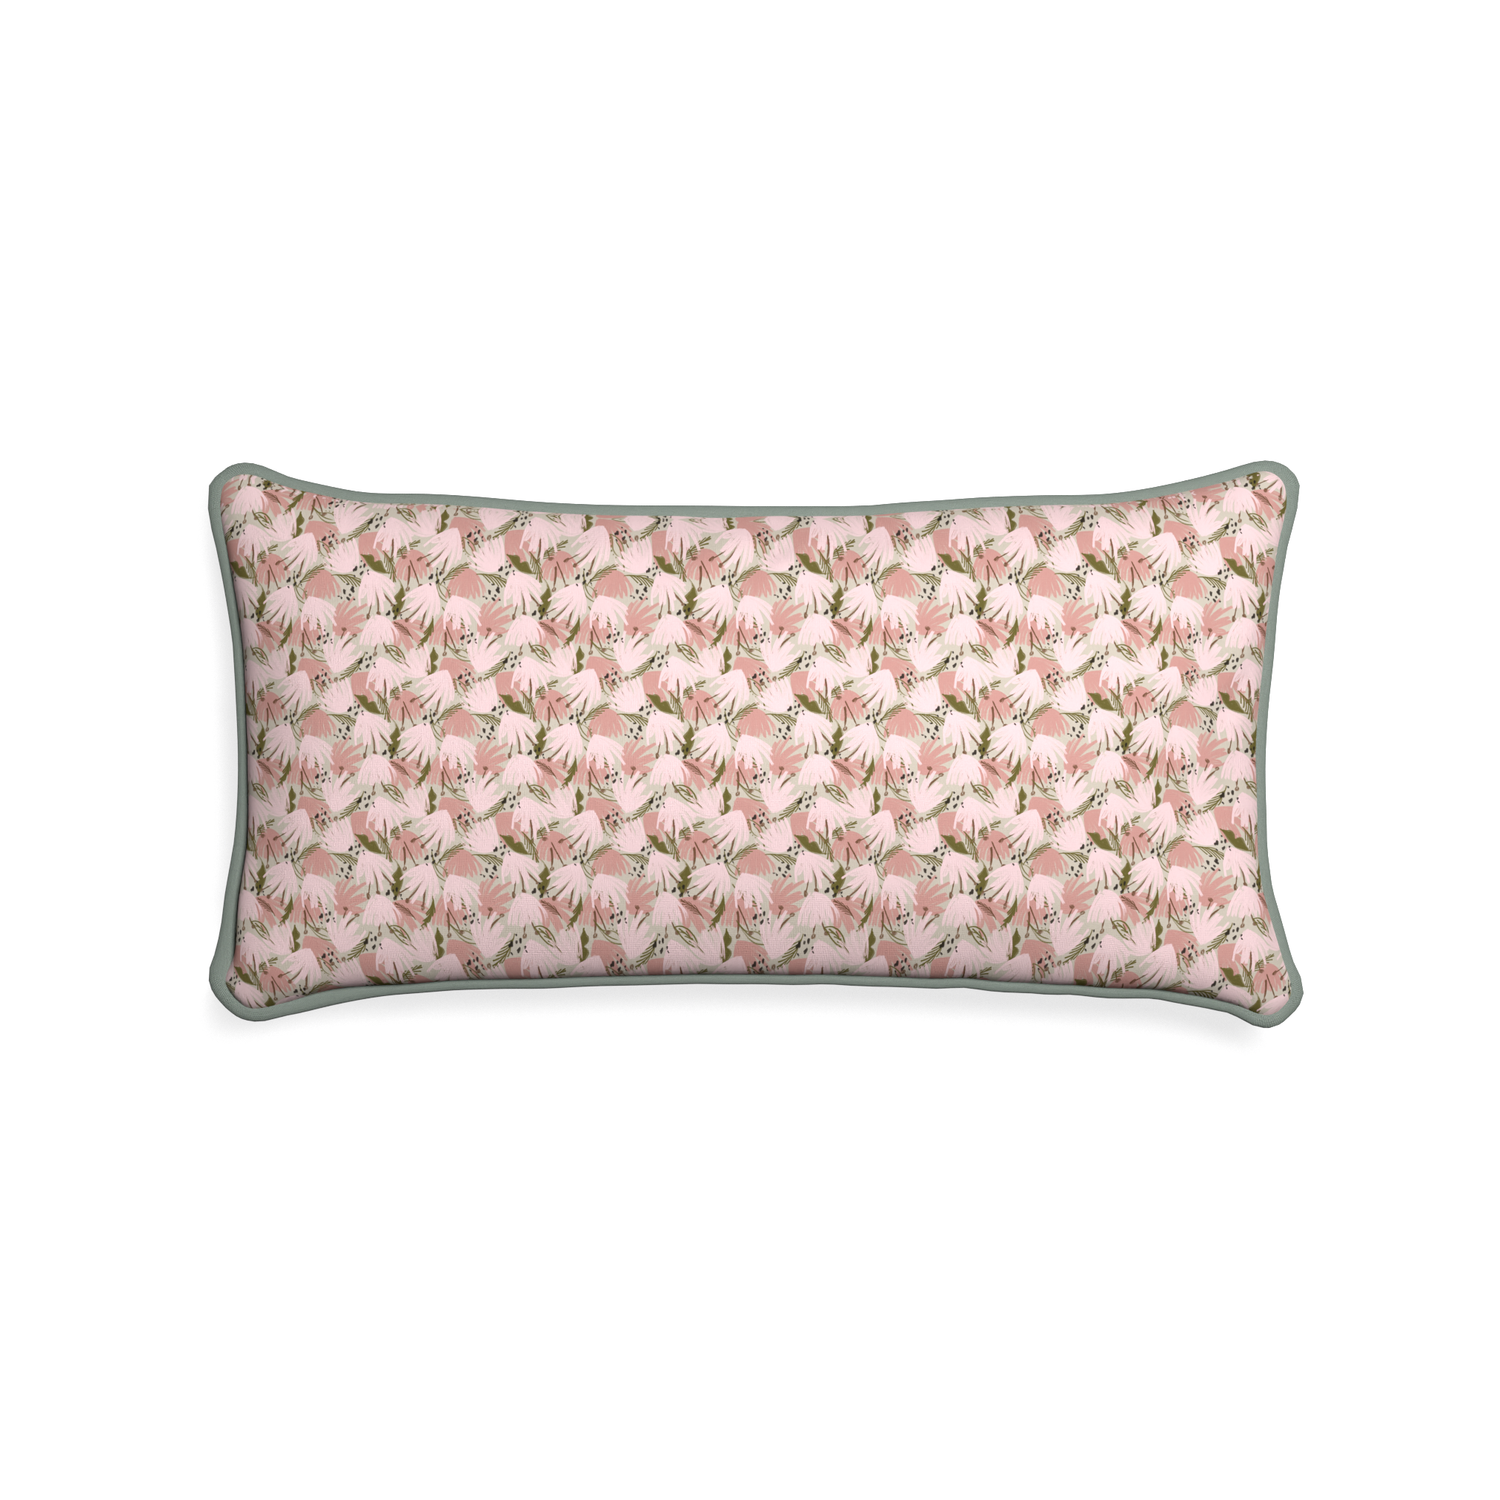 Midi-lumbar eden pink custom pink floralpillow with sage piping on white background